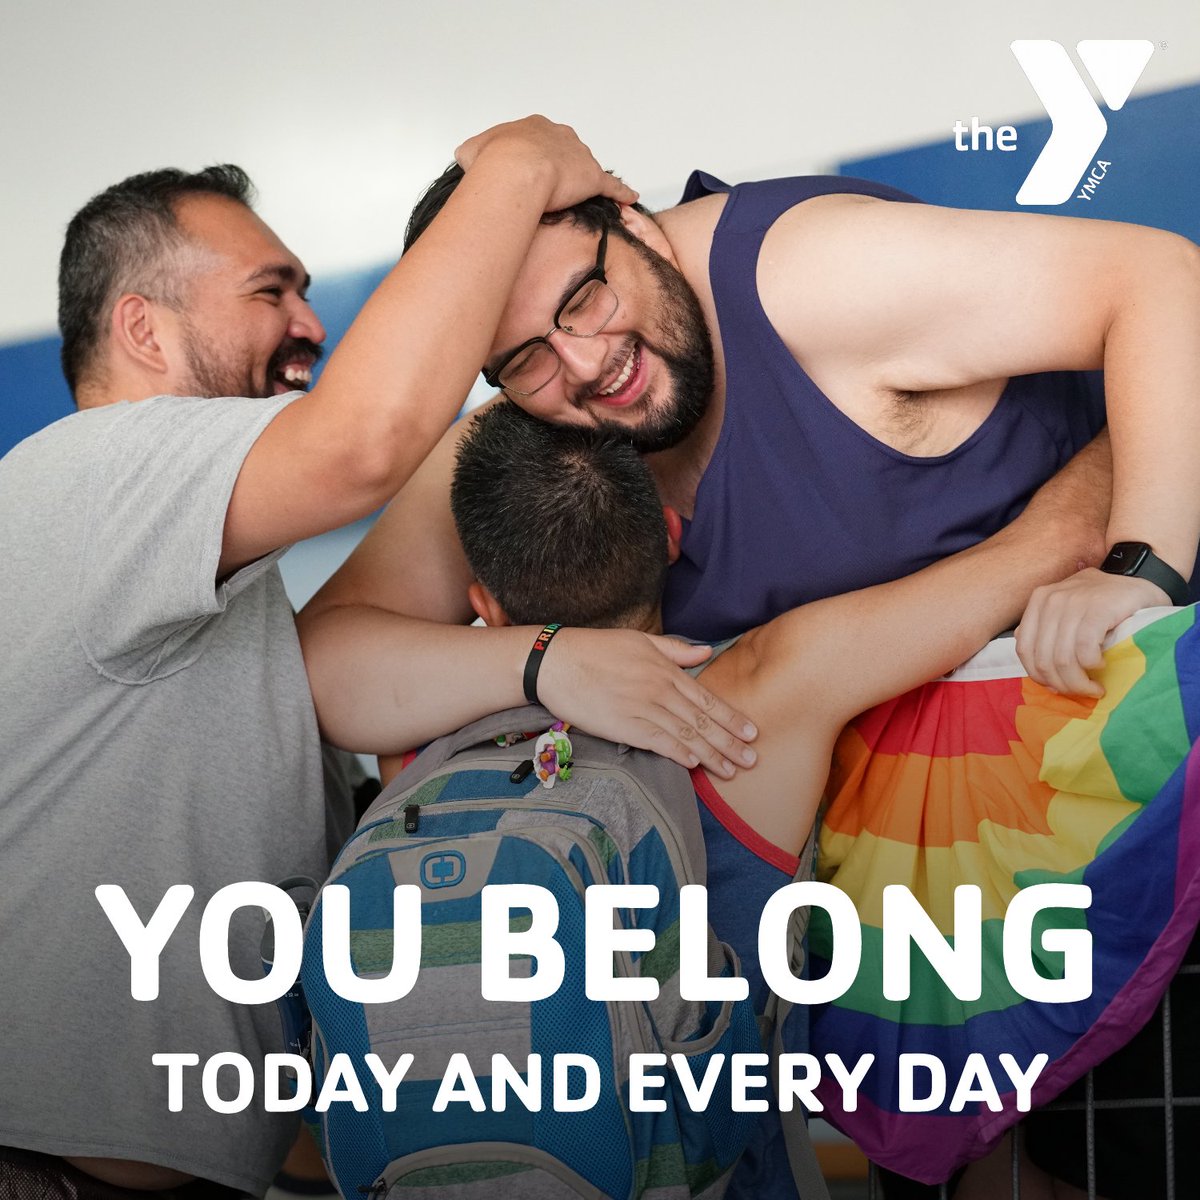 At the Greater Austin YMCA, Pride Month is an opportunity to live up to our mission of providing a safe, welcoming community for all. #YPride #YForAll #PrideMonth